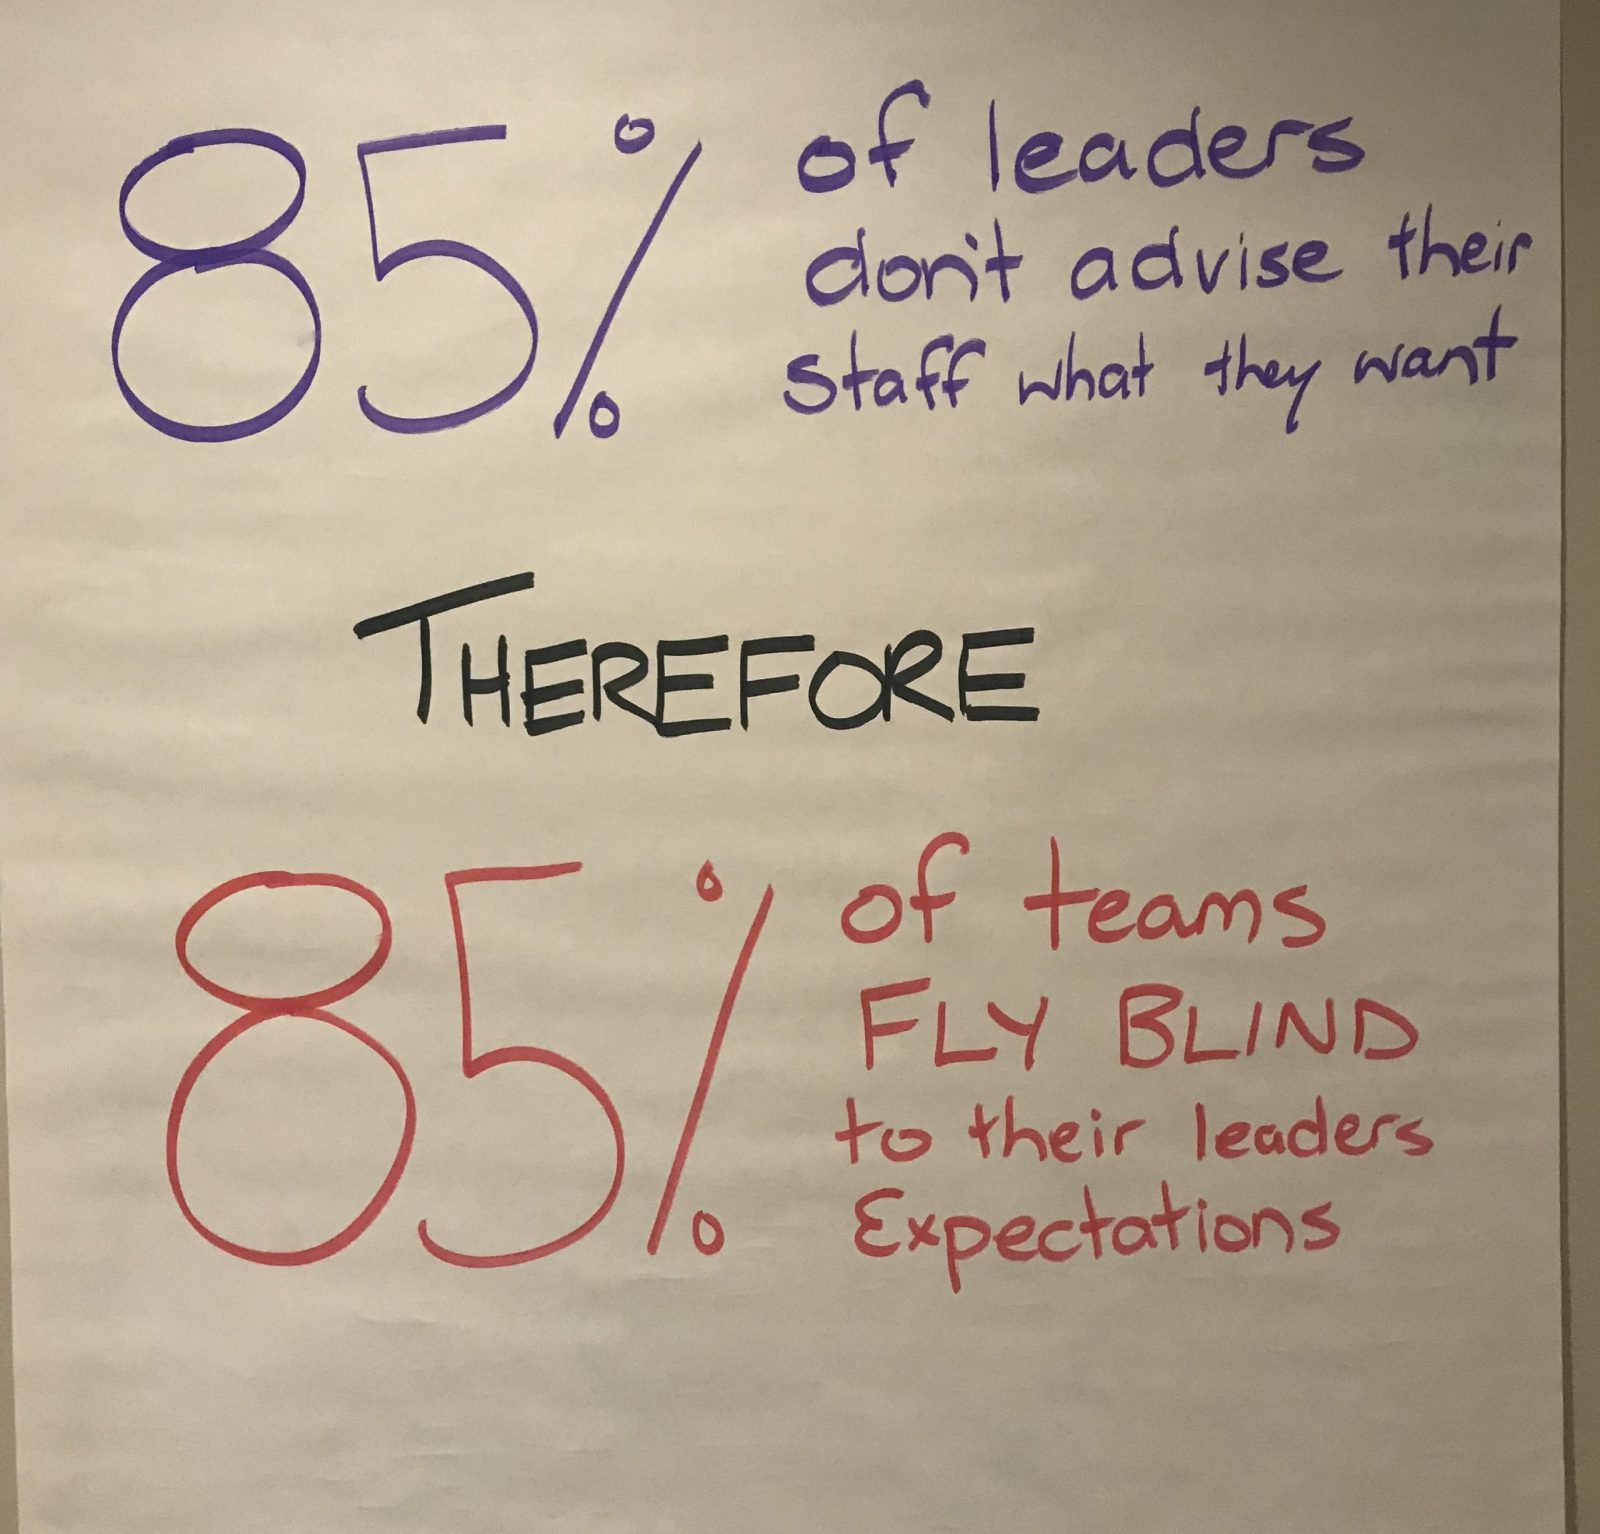 Leadership is not expecting common sense